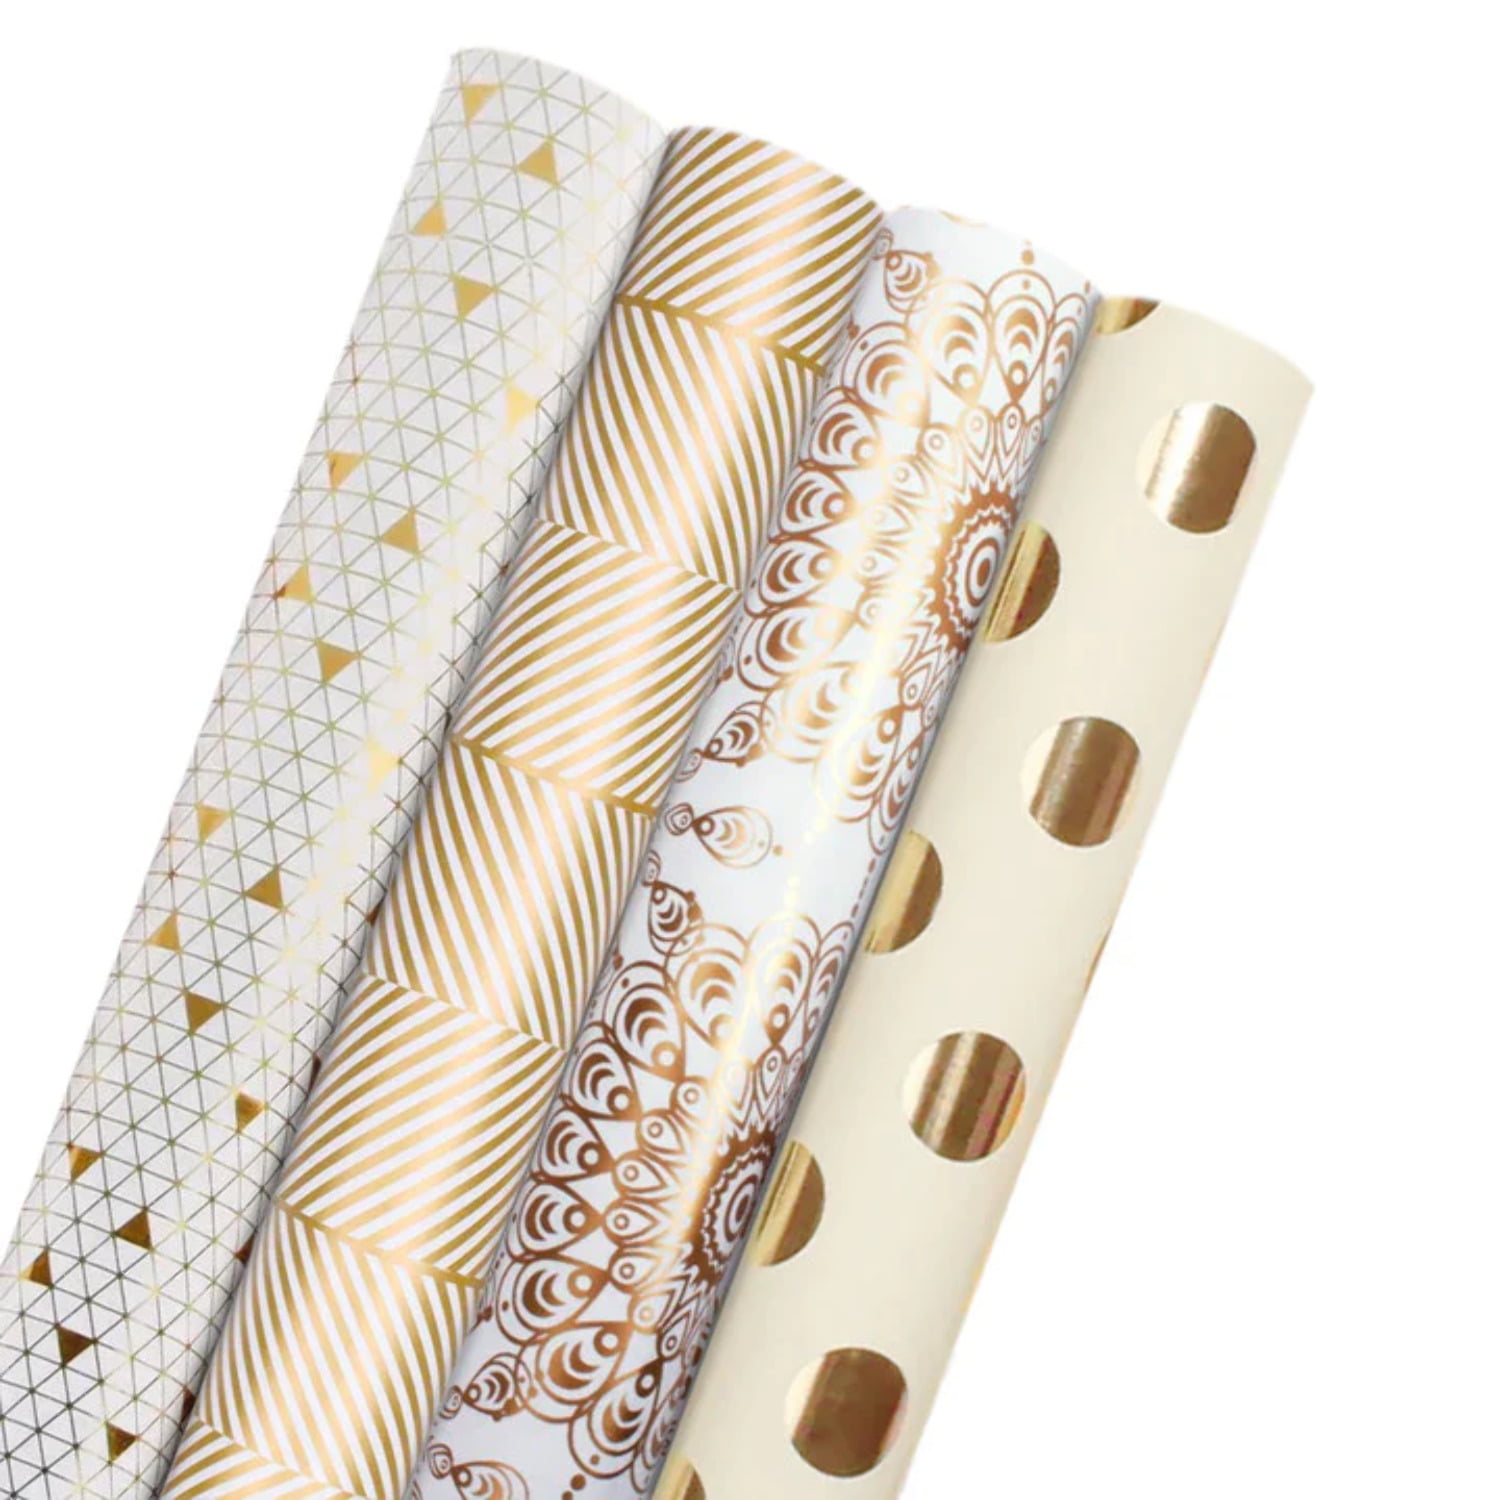 Metallic Zebra Gold Foil/White Wrapping Paper Roll - 30 X 16'/Roll